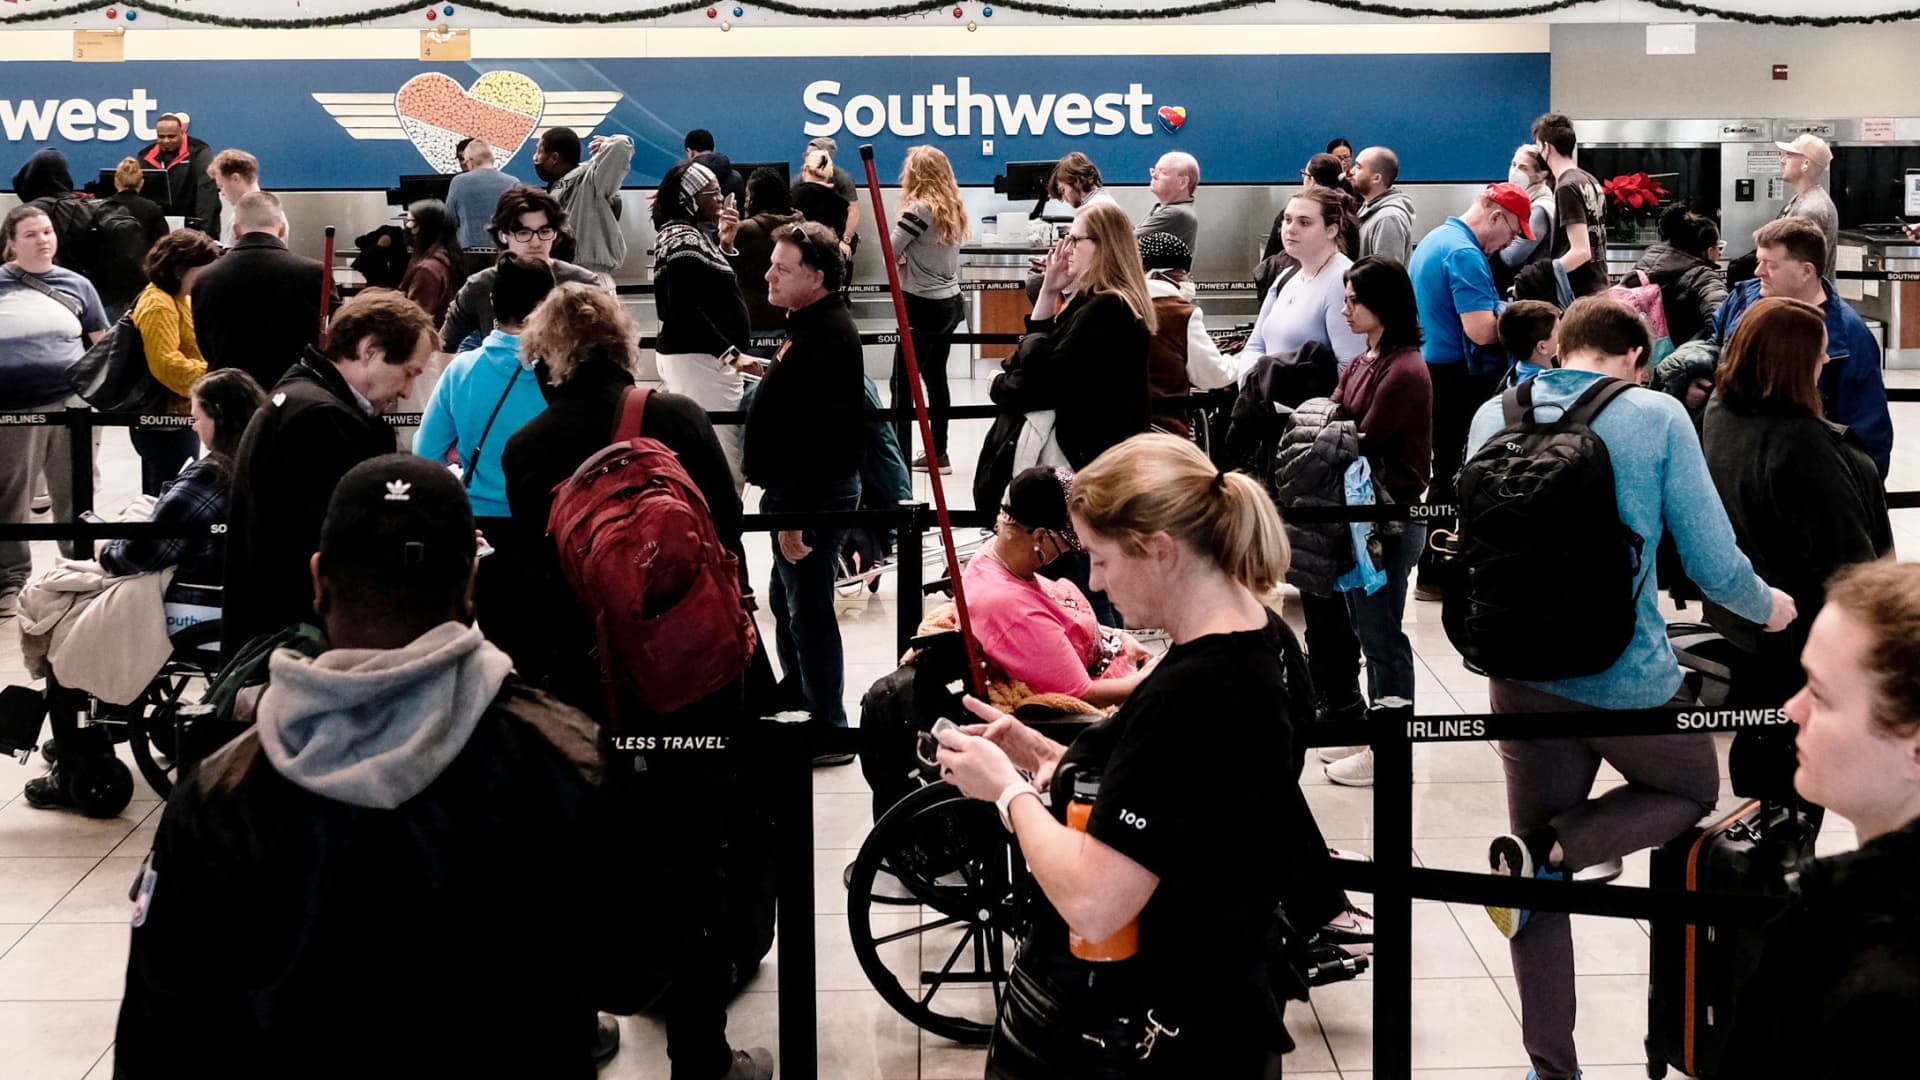 Southwest Airlines says it expects normal operations on Friday after thousands of cancellations